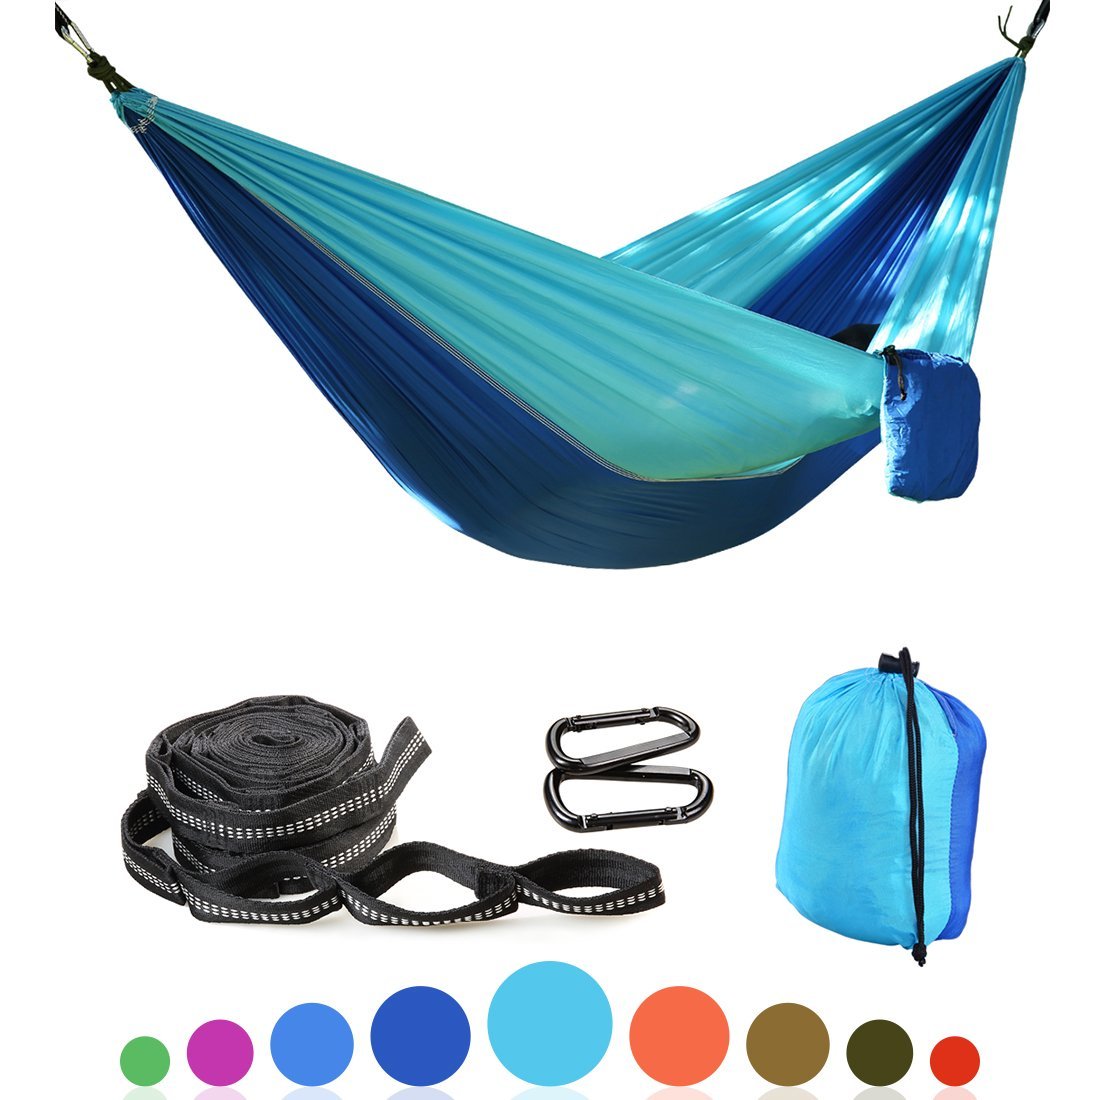 Balichun Parachute Hammock 500lbs Capacity with 2 Straps(for Indoor and Outdoor),Ultralight Portable Multifunctional 210T Nylon Single Hammocks for Light Travel Camping Hiking Backpacking Beach Patio